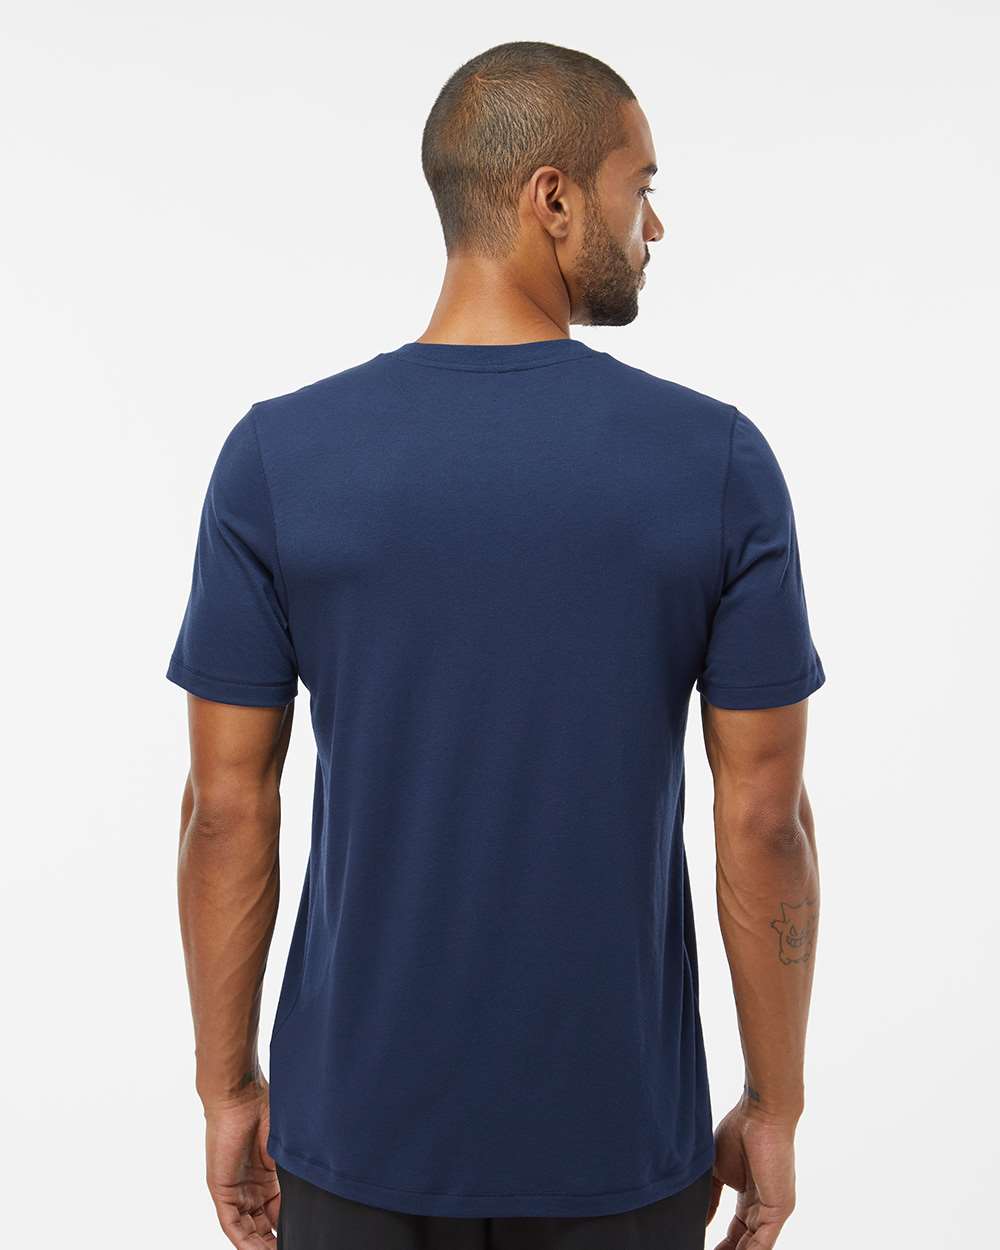 Adidas A556 Blended T-Shirt #colormdl_Collegiate Navy